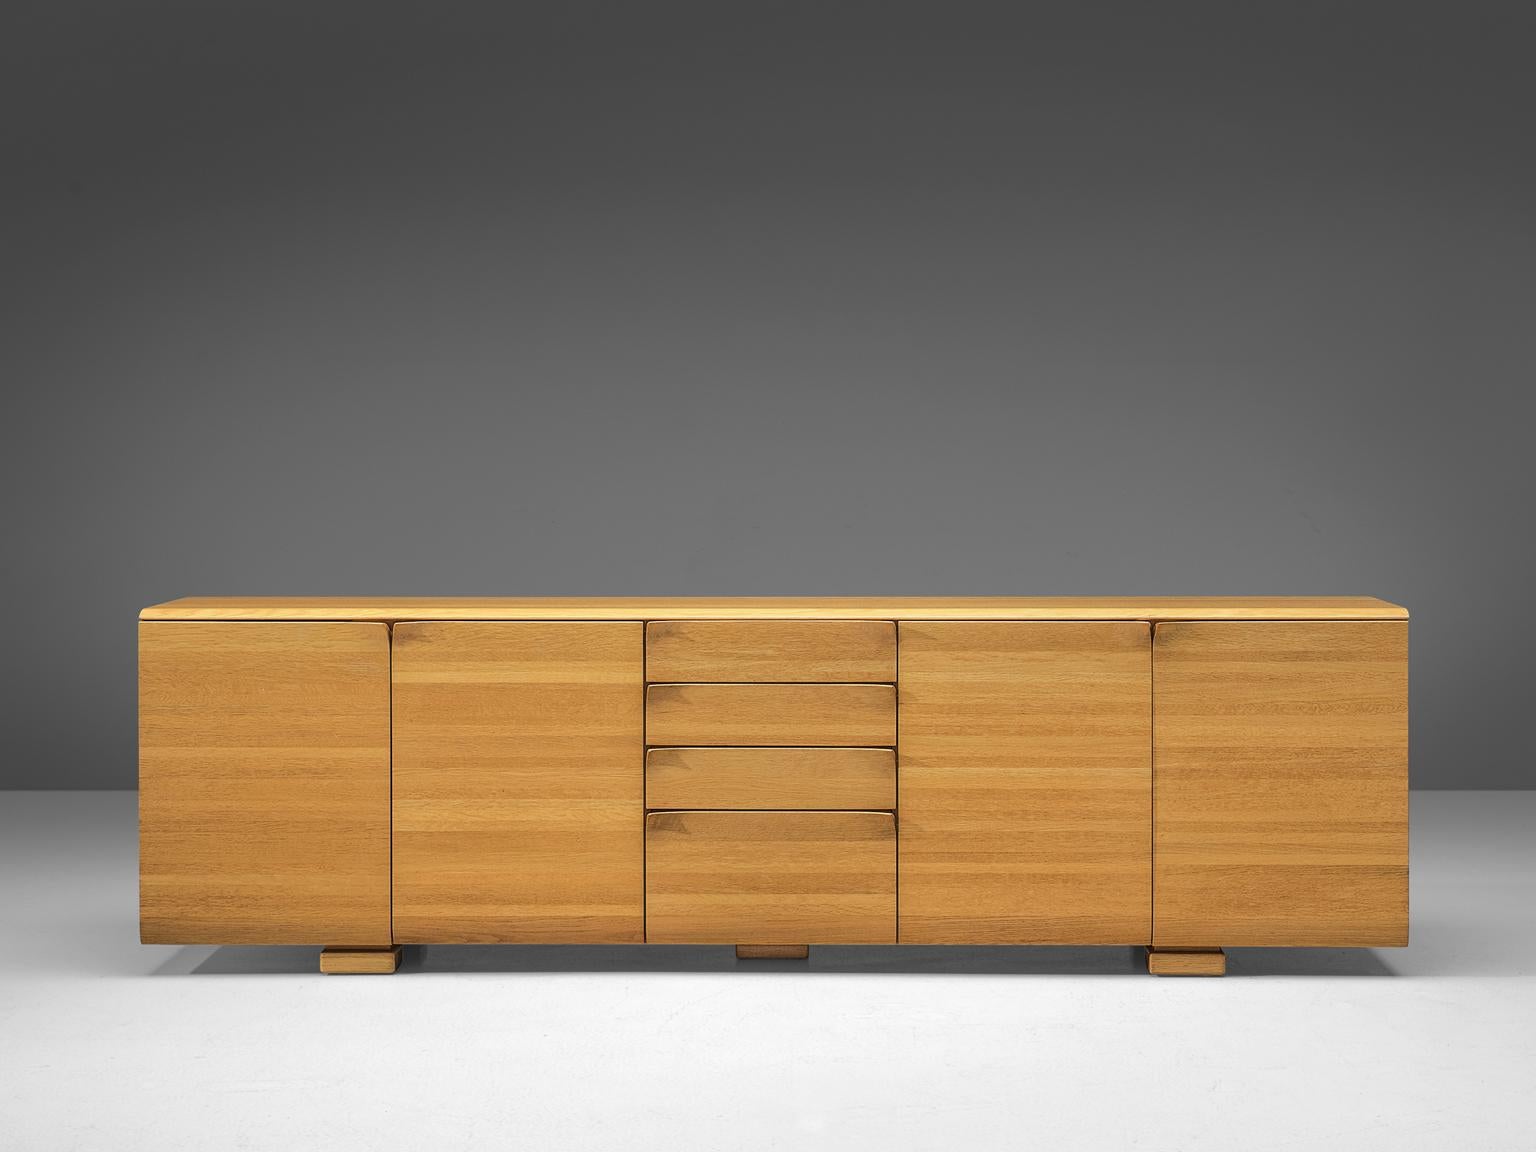 Sideboard by Van Den Berghe - Pauvers, elm, Belgium, 1970s.

Minimalistic sideboard that is very well designed. This Belgian credenza features doors and drawers with striking handles. The doors flow over in the handles, which create a similar idea